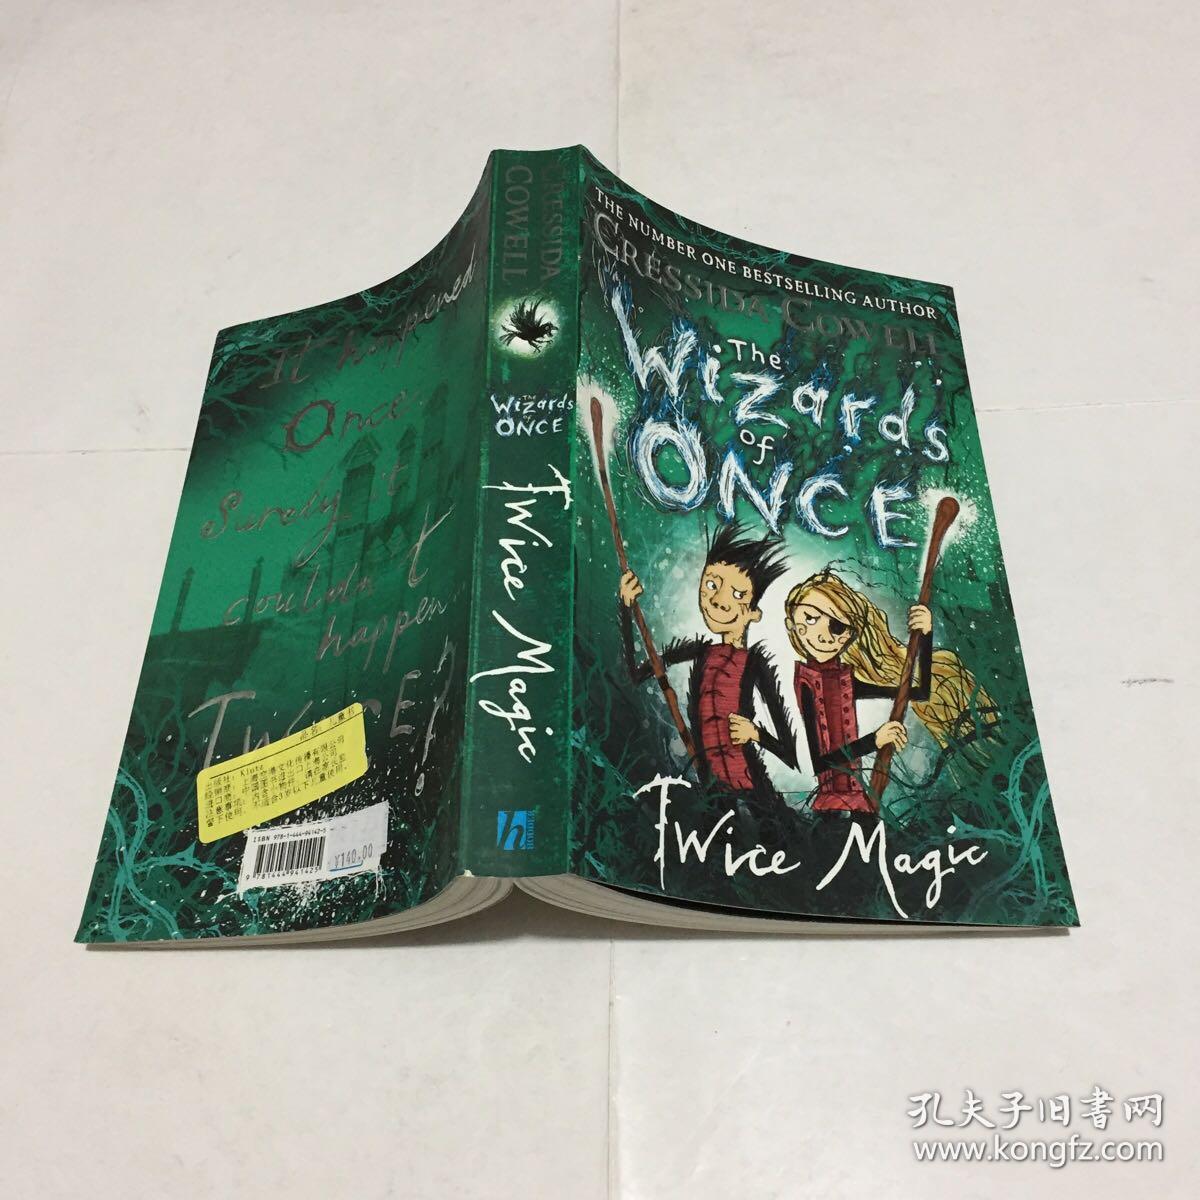 THE NUMBER ONE BESTSELLING AUTHOR  魔镜奇谭2双倍魔力英文原版The Wizards of Once Cressida Cowell  插图  大32开 库存书